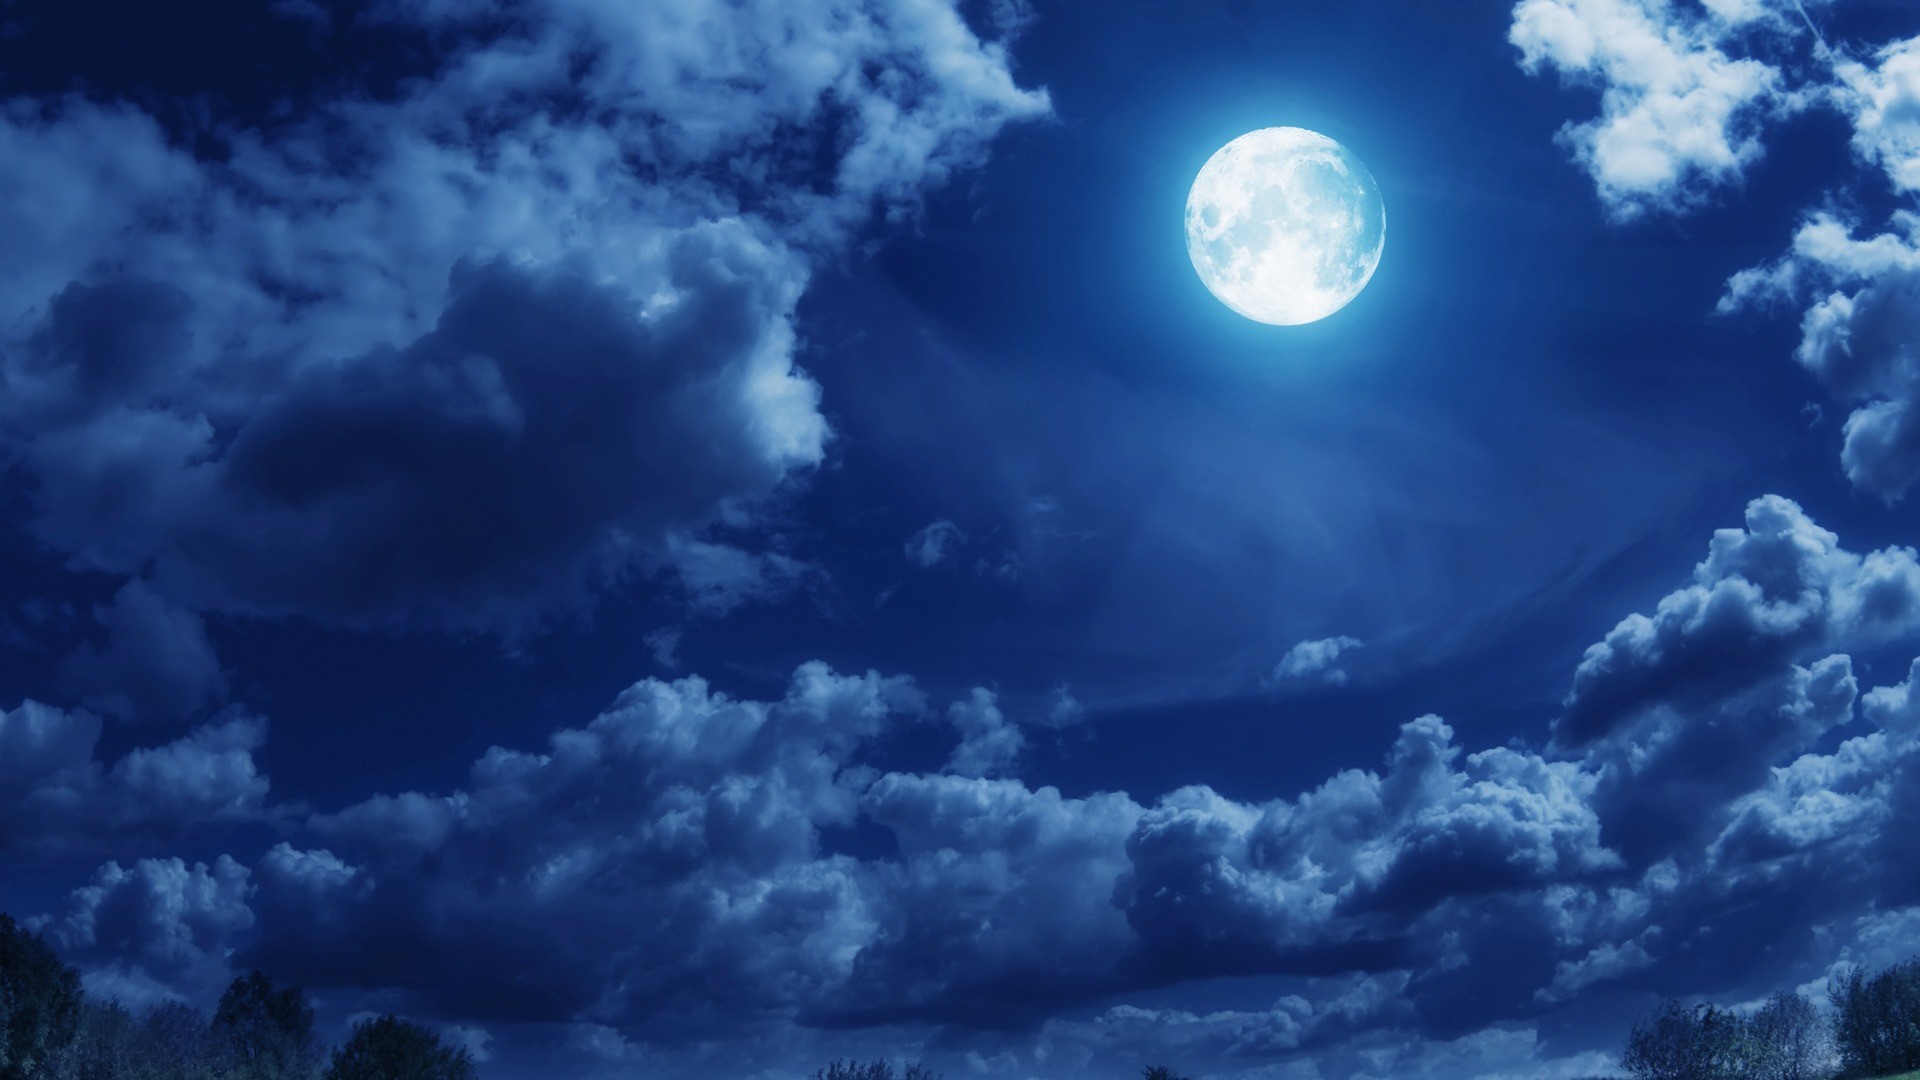 Clouds in the moonlit night wallpapers and images - wallpapers